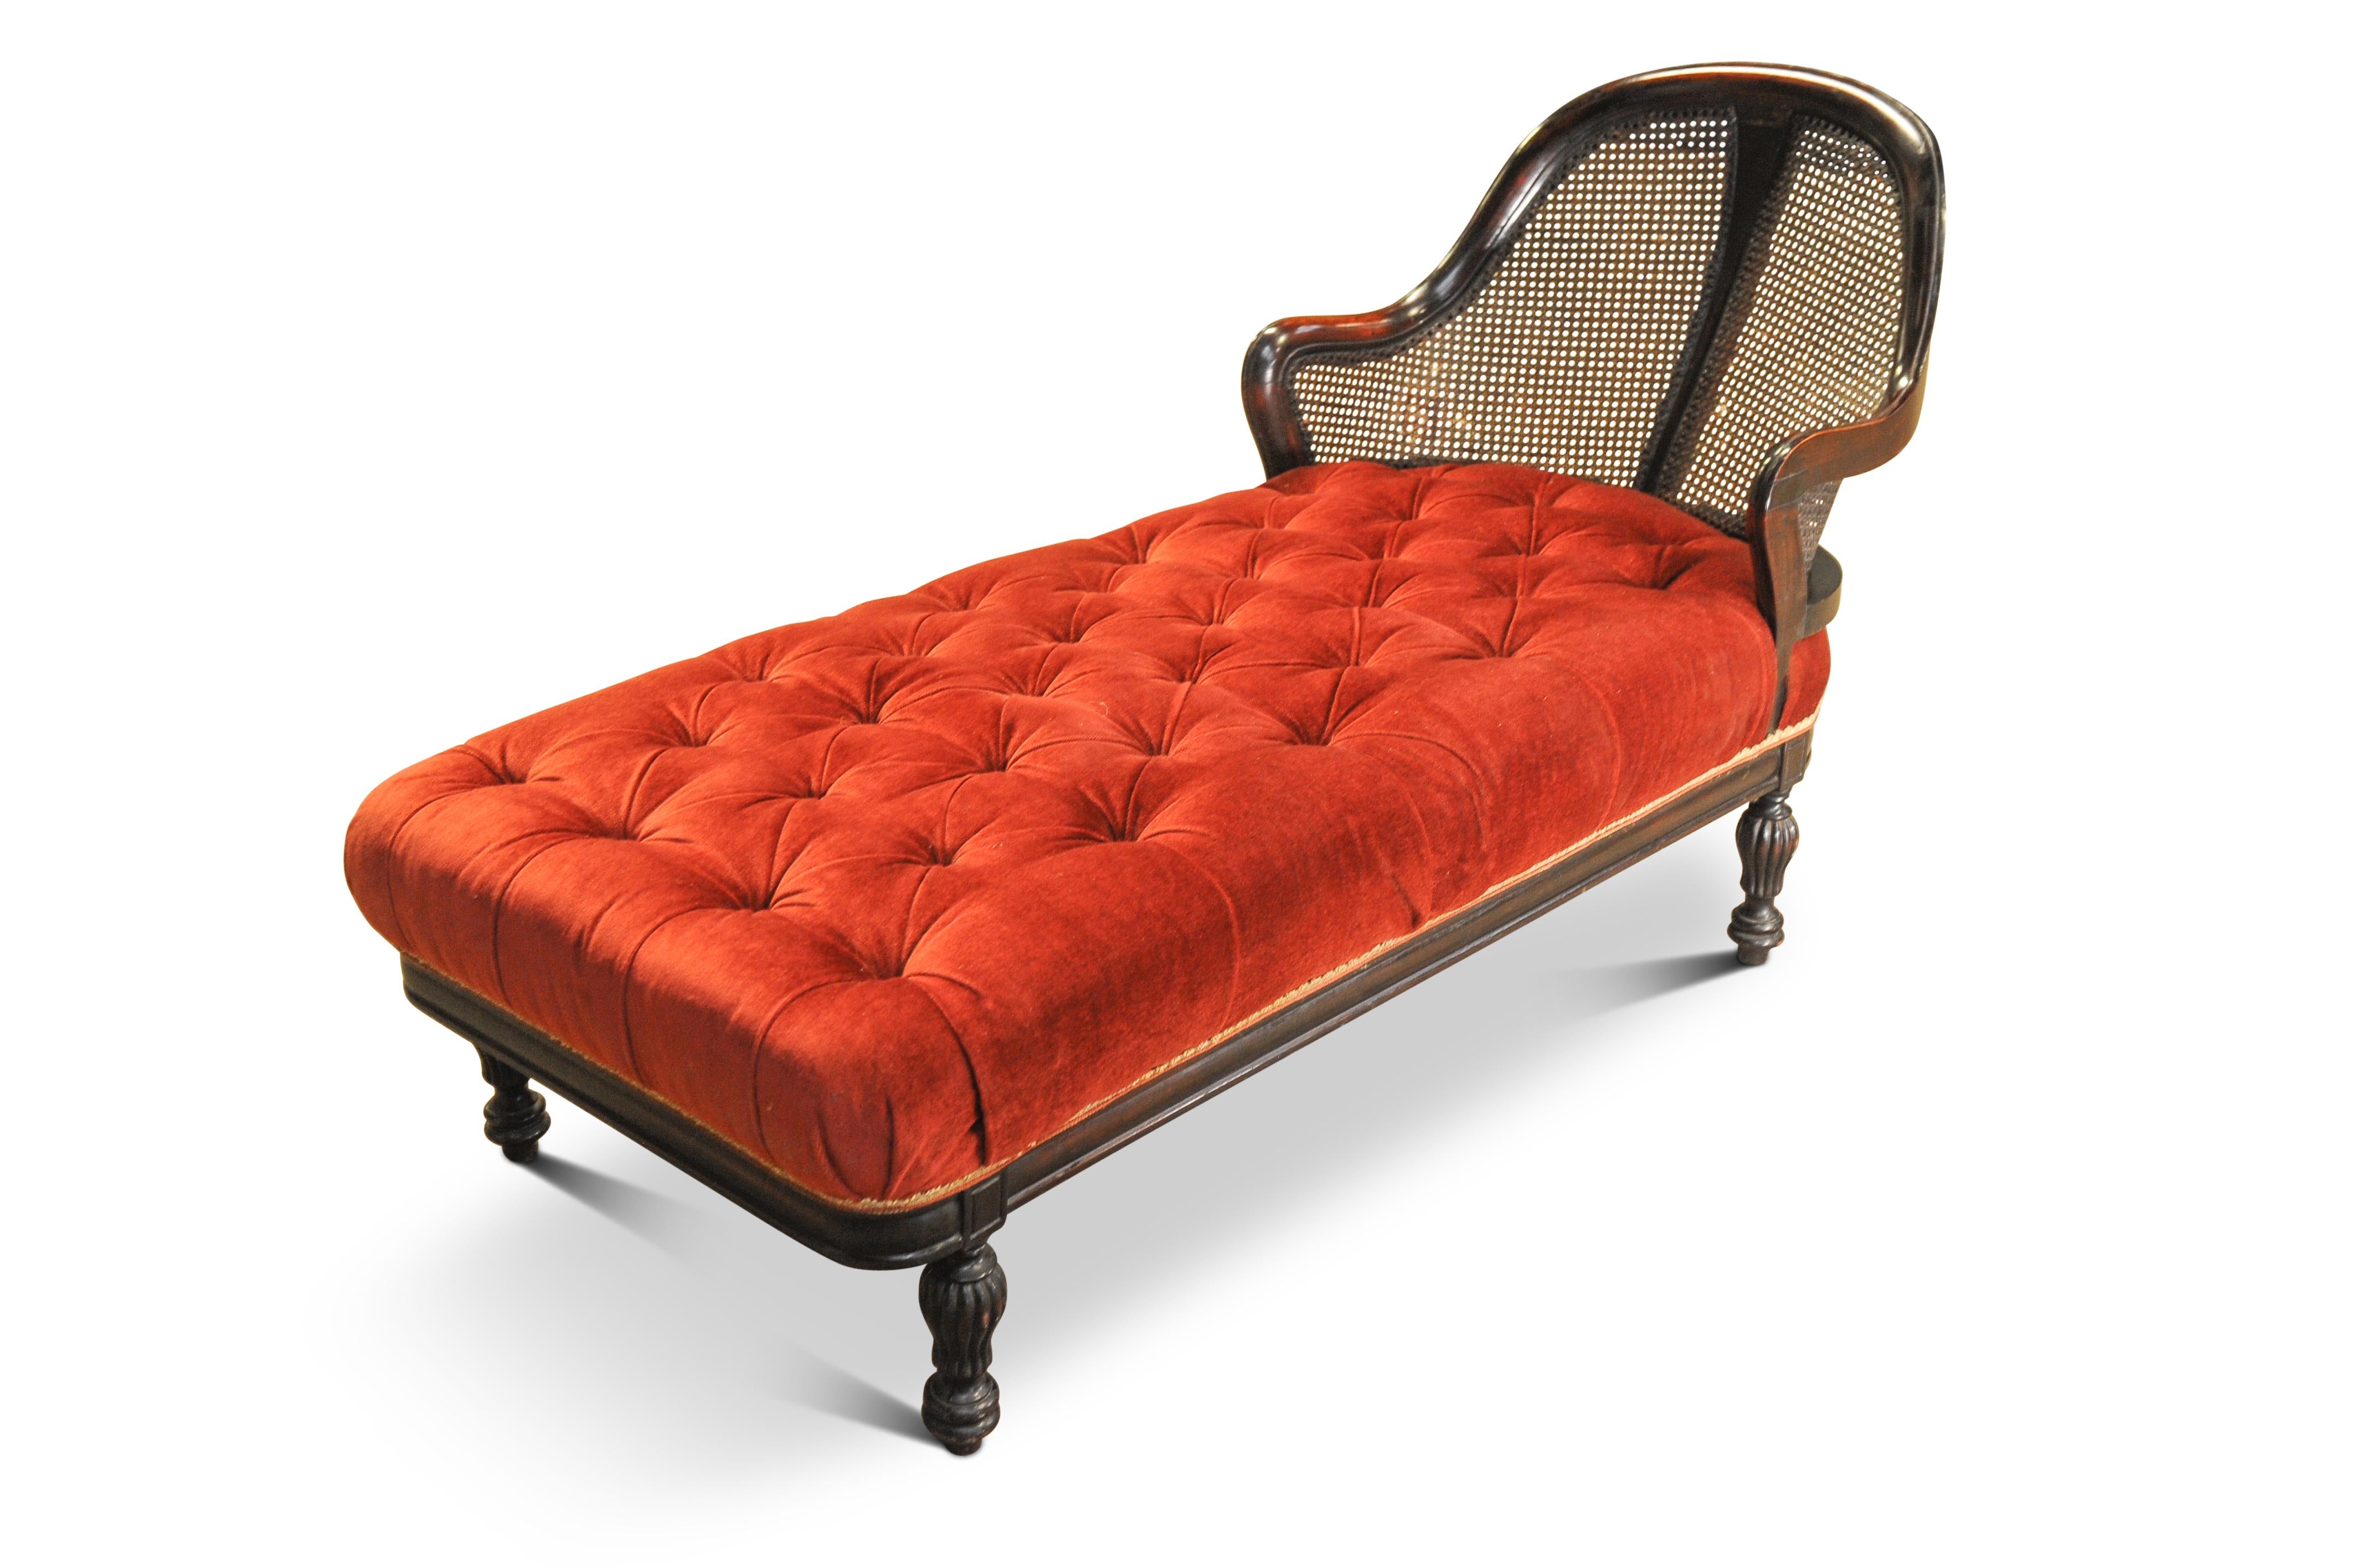 British Rare Victorian Red Velvet Chesterfield Bergere Chaise Longue / Day Bed  For Sale